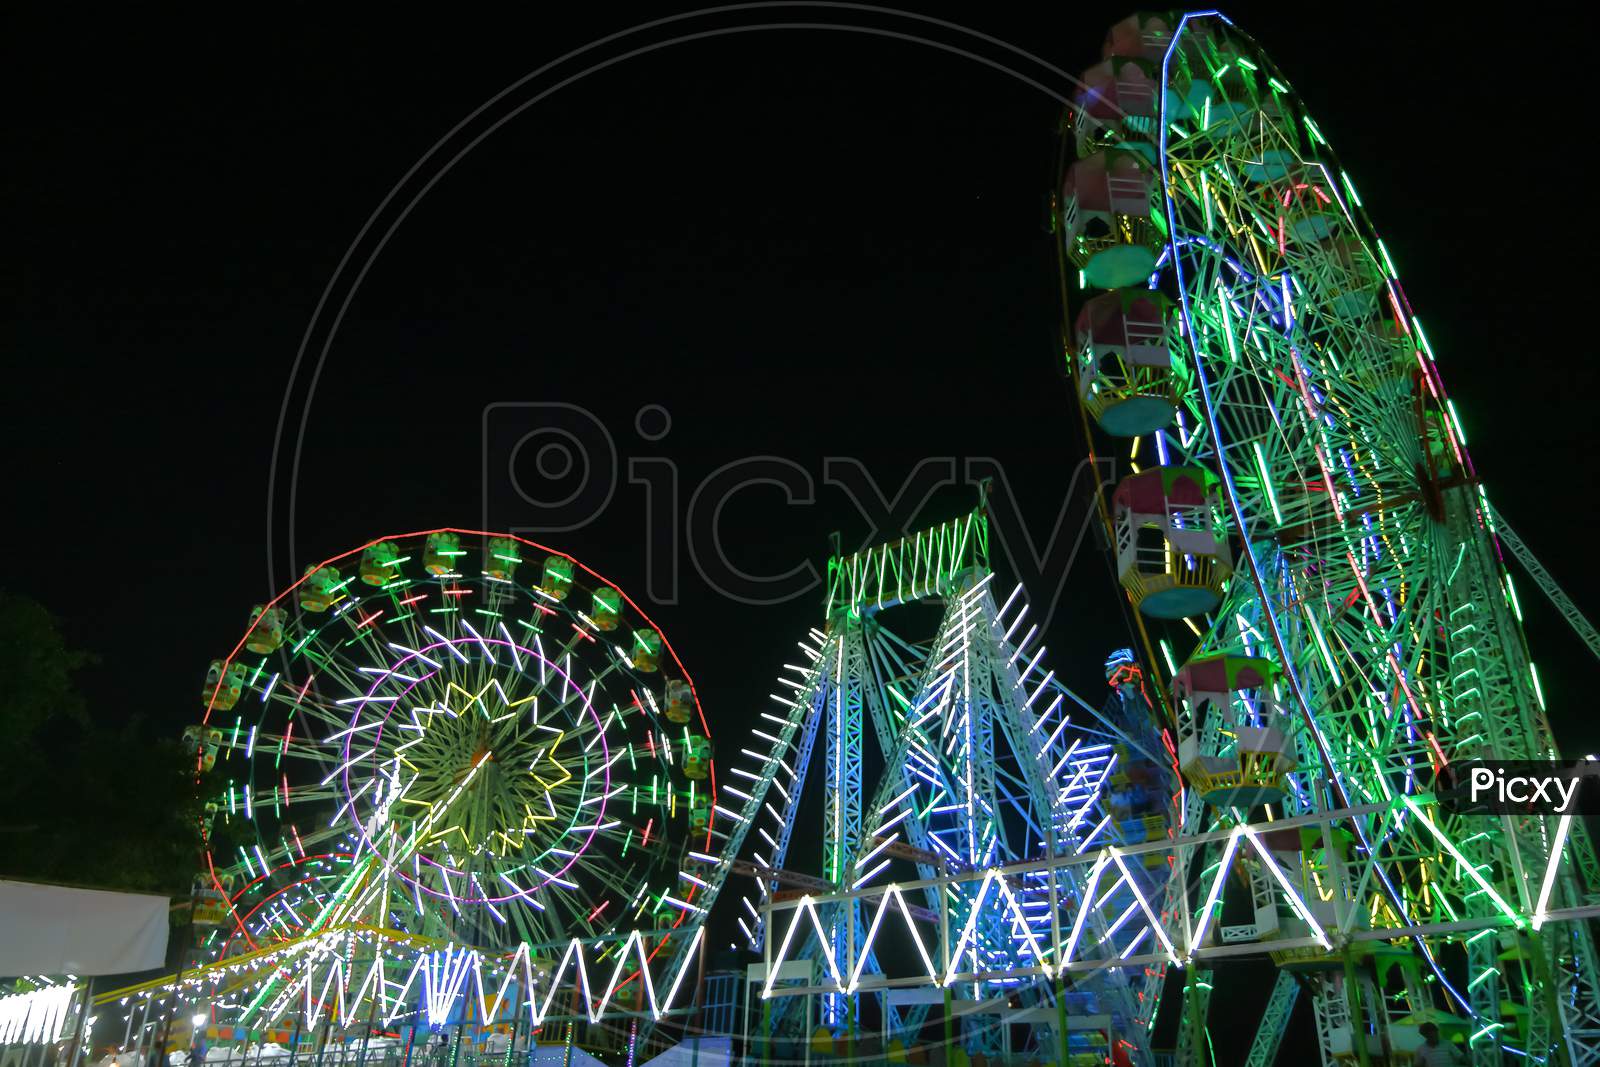 Abstract image of Giant wheels